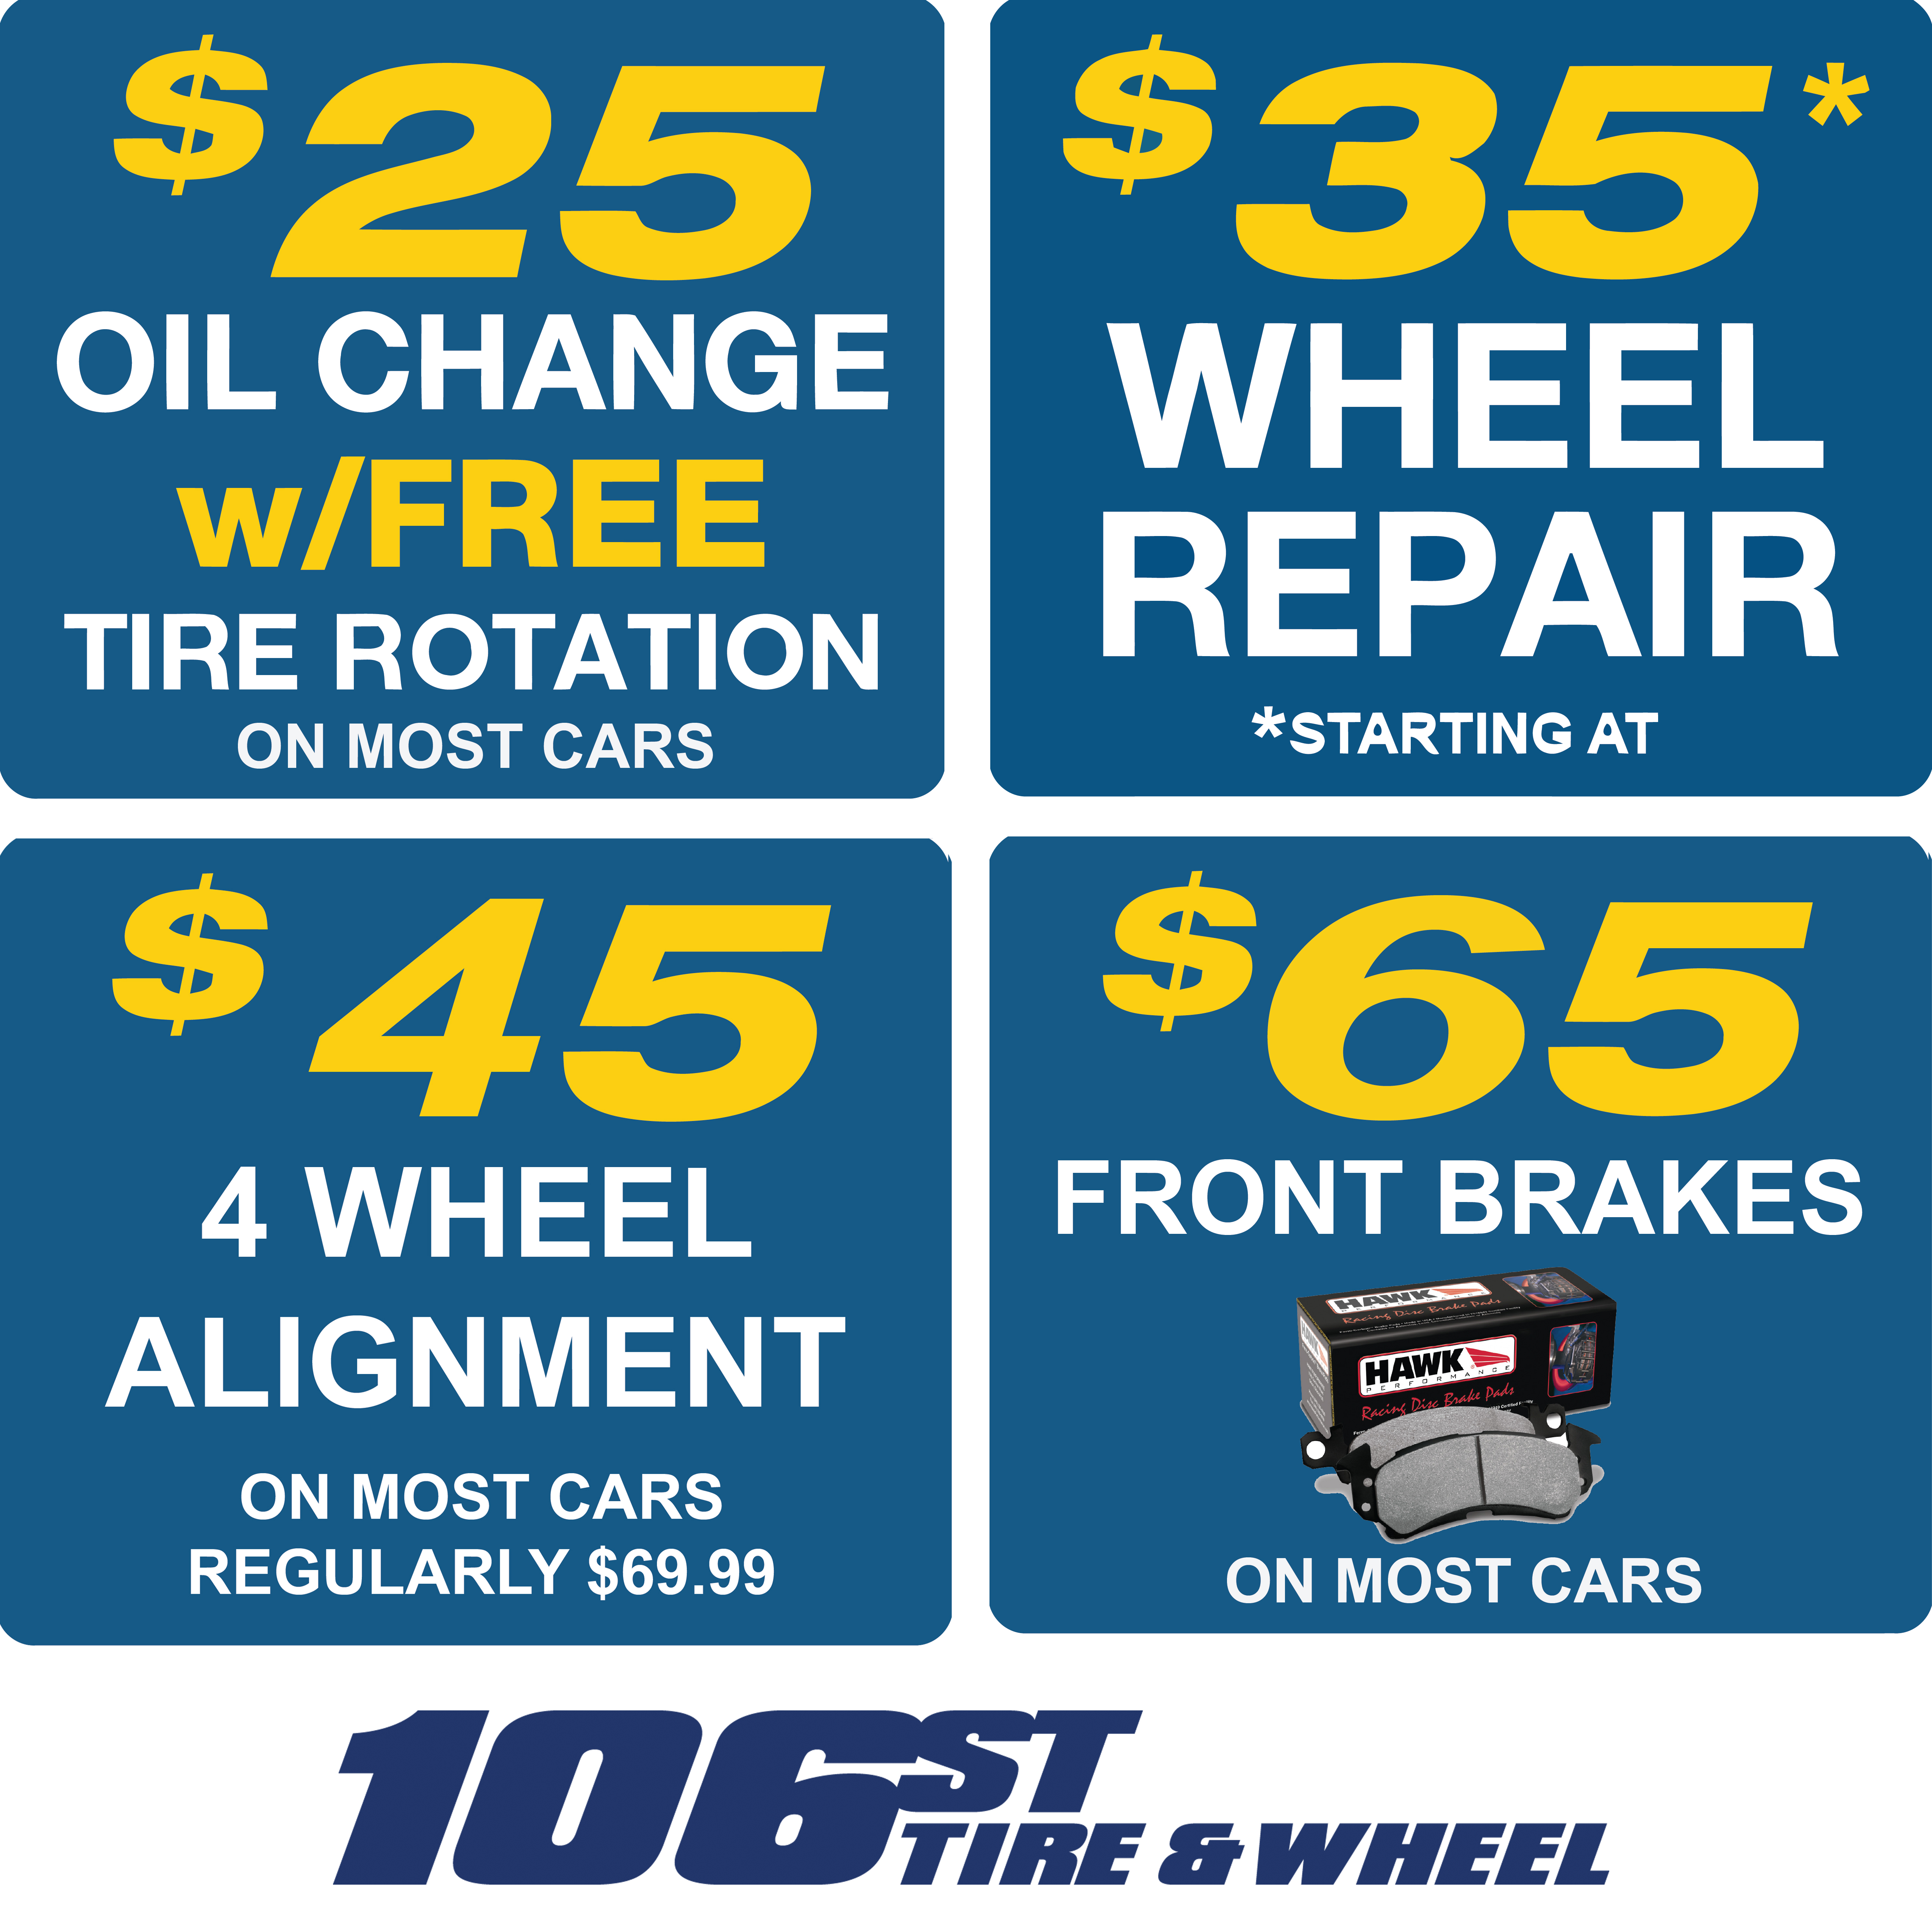 Why You Should Choose 106St for Wheel Repair (Part 2)